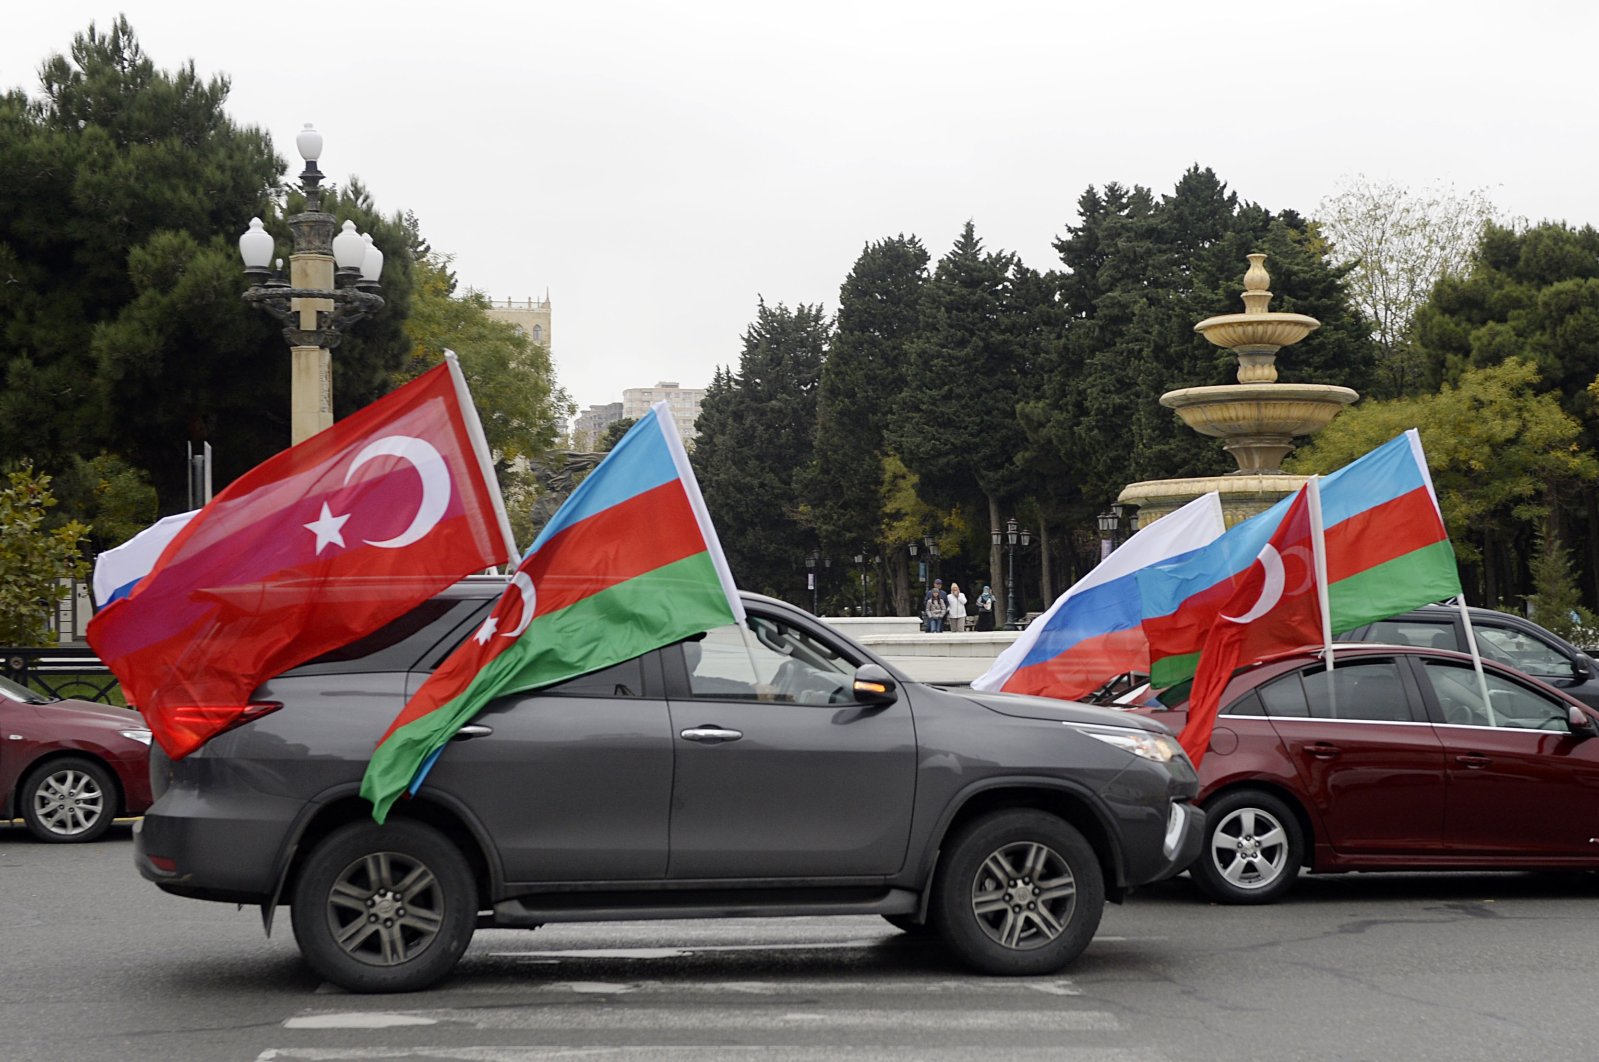 Motorists hold Azerbaijani, Turkish and Russian flags during celebrations of the country's victory over Armenia after a weekslong war over the disputed Nagorno-Karabakh region, Baku, Azerbaijan, Nov. 20, 2020. (AFP Photo)